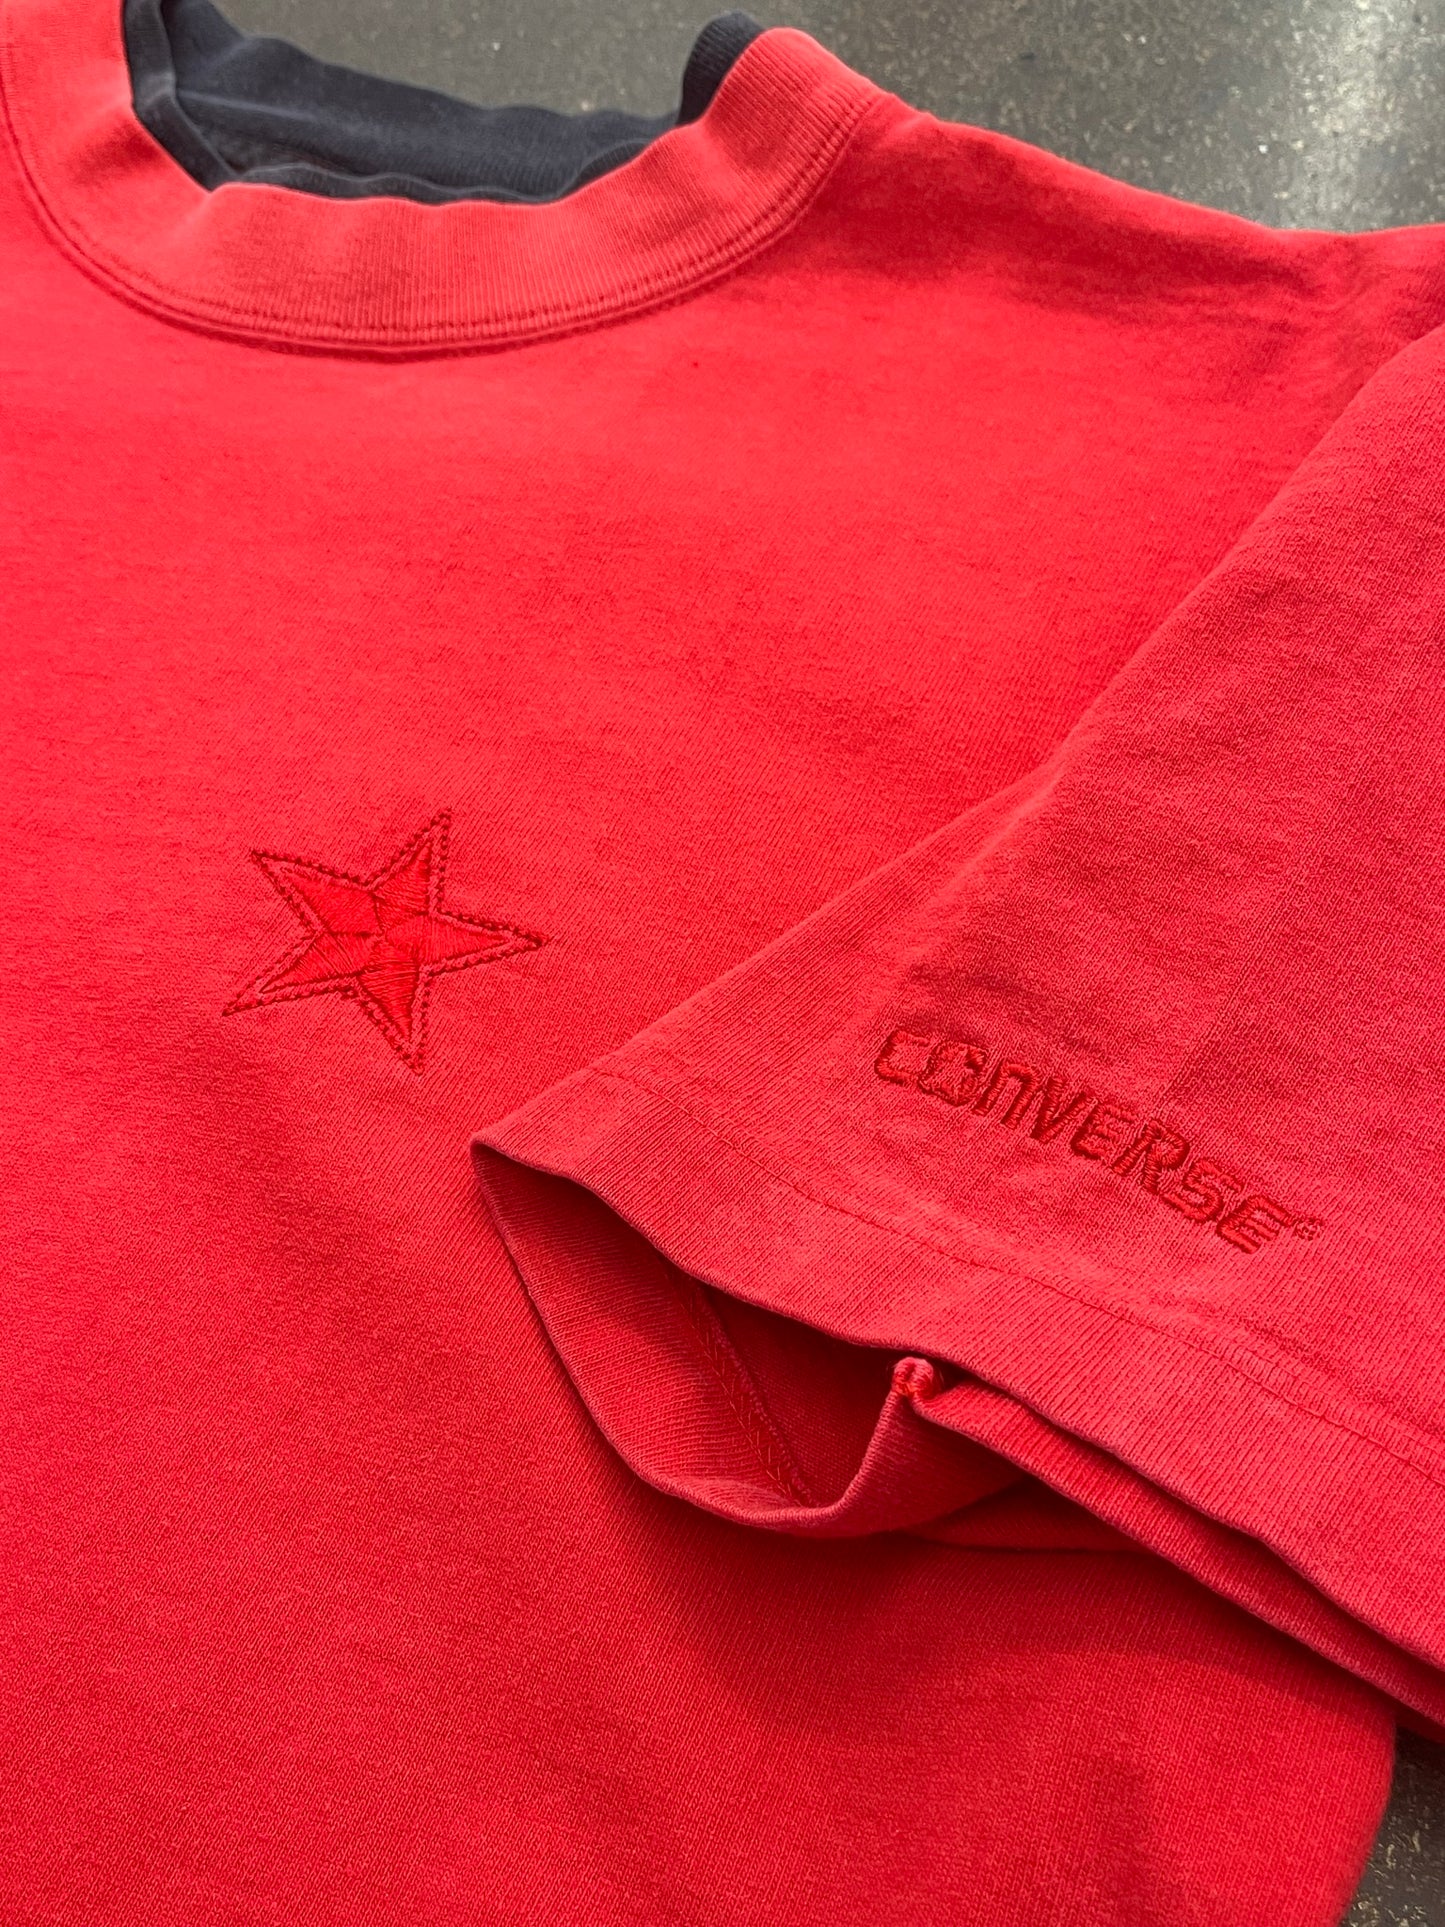 Vintage 90's Converse Star Red Tee Size L